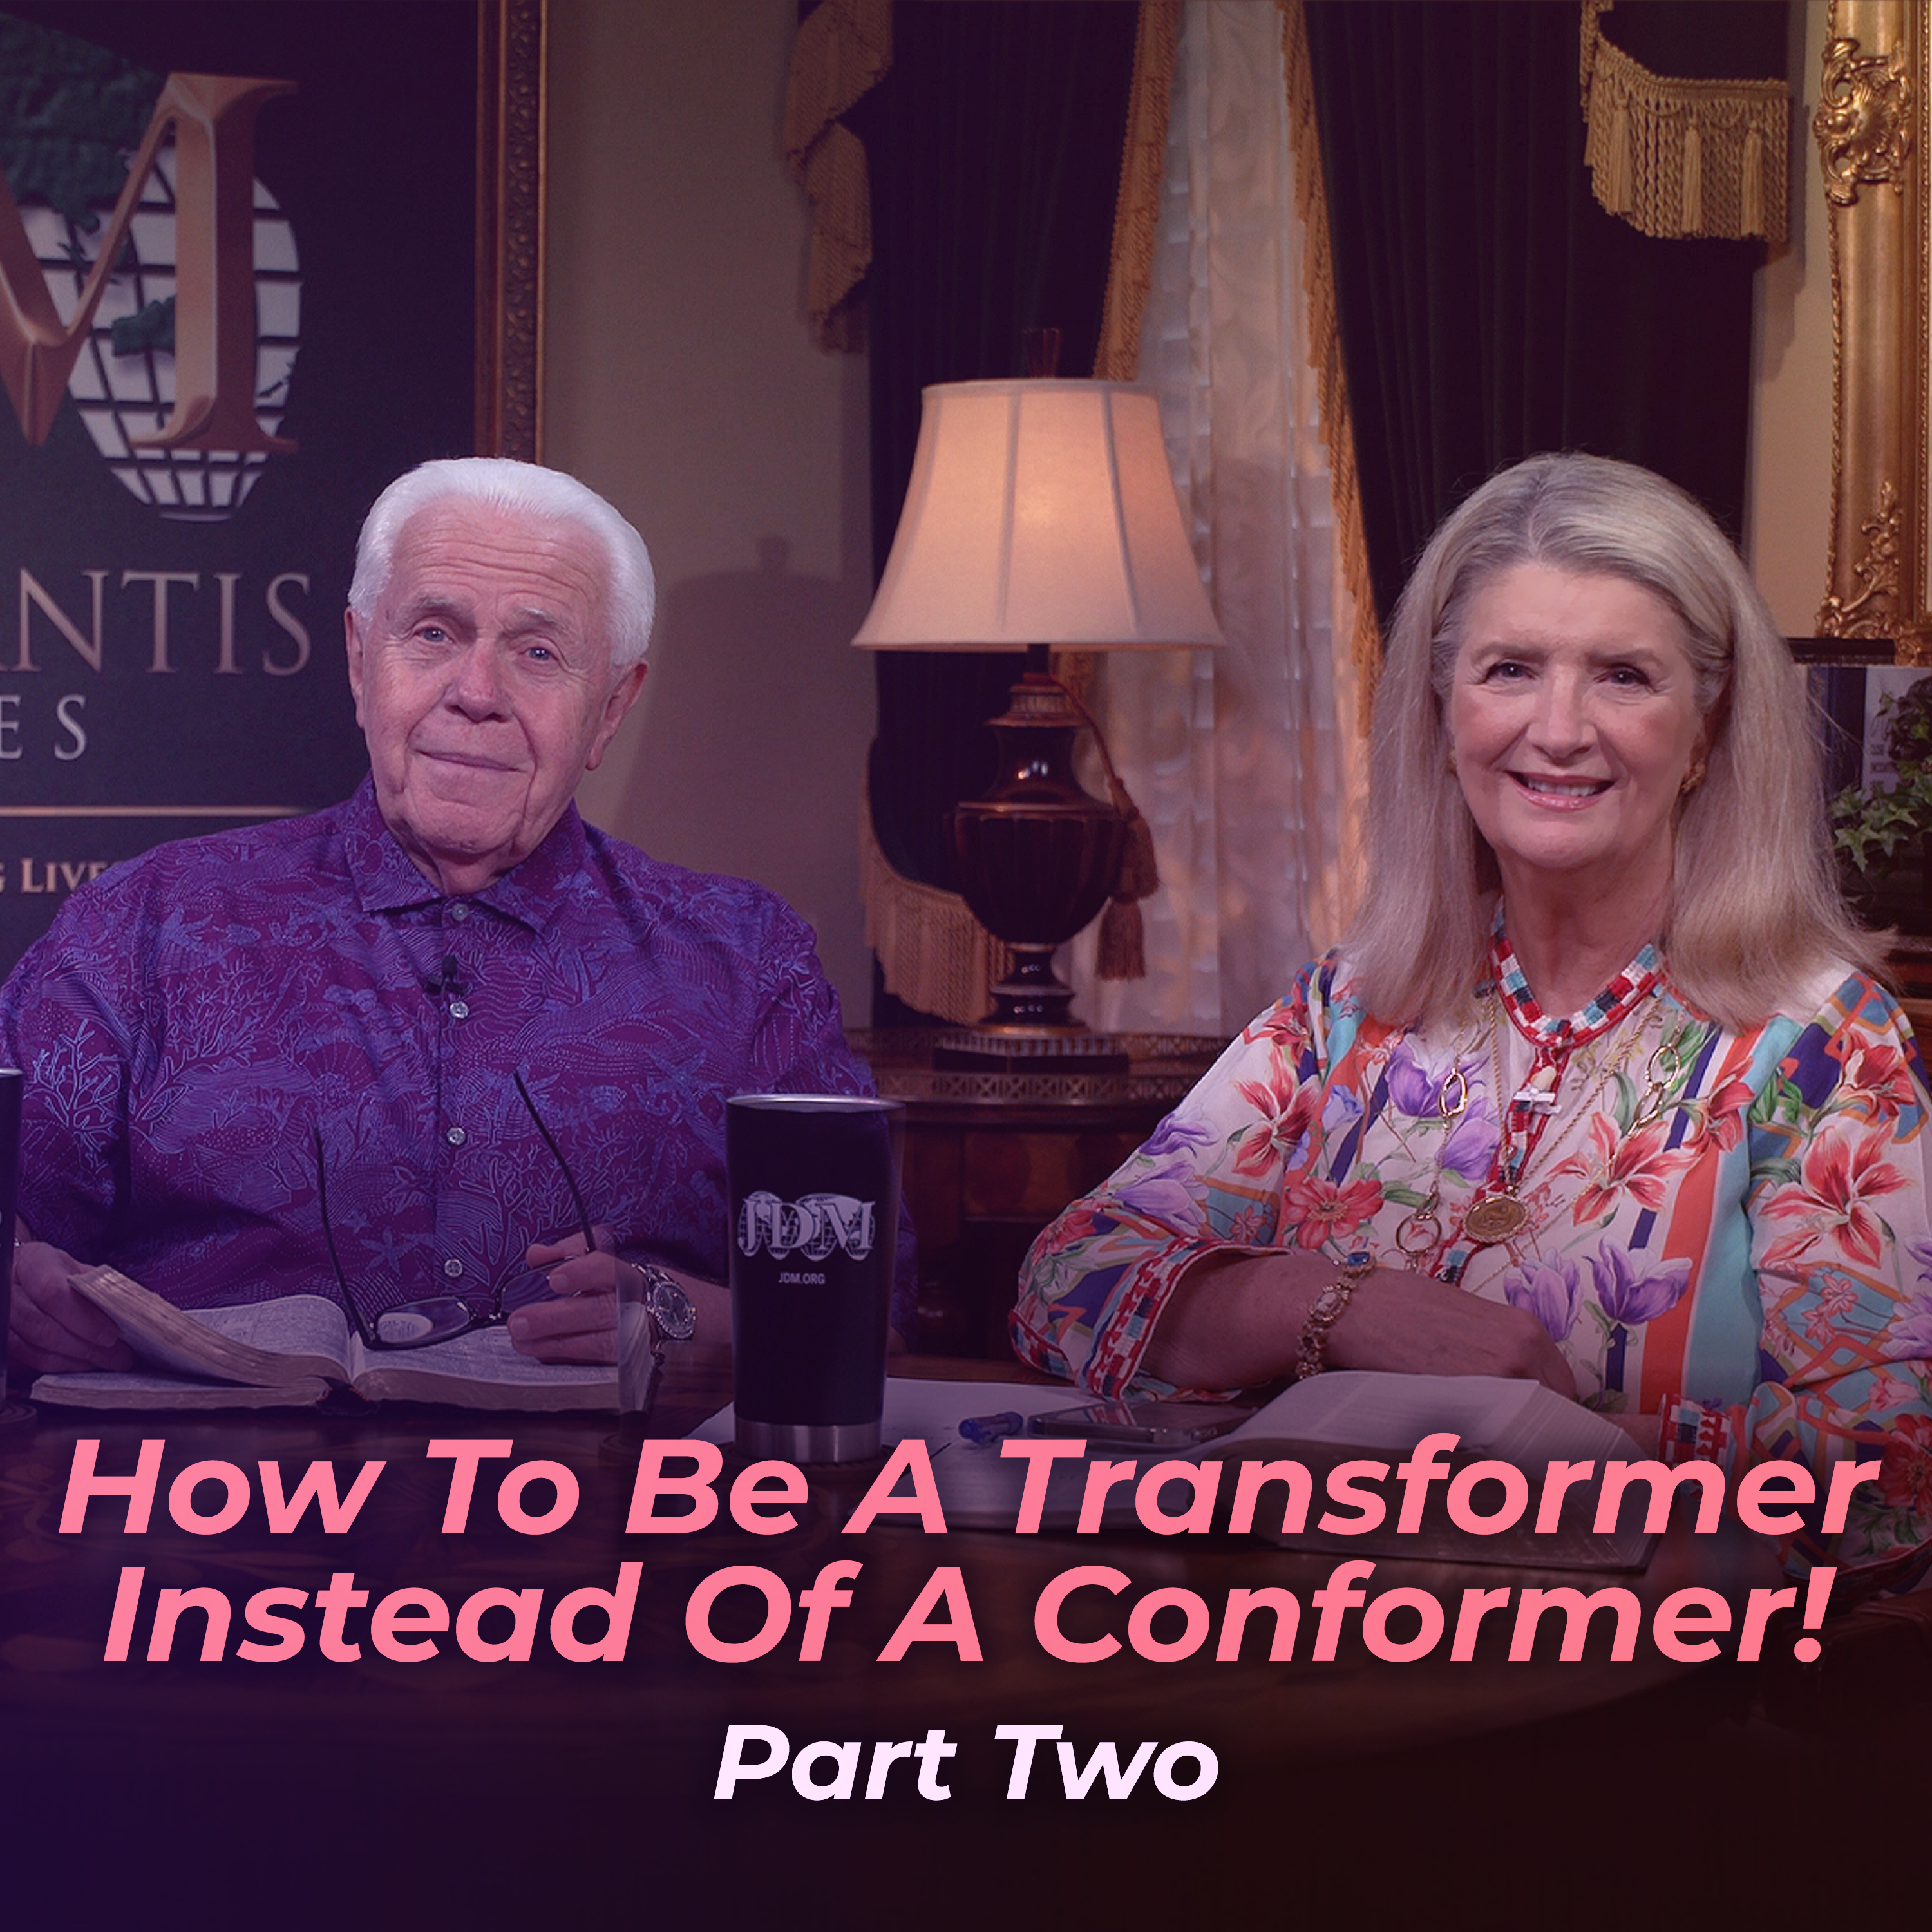 How To Be A Transformer Instead Of A Conformer, Part 2